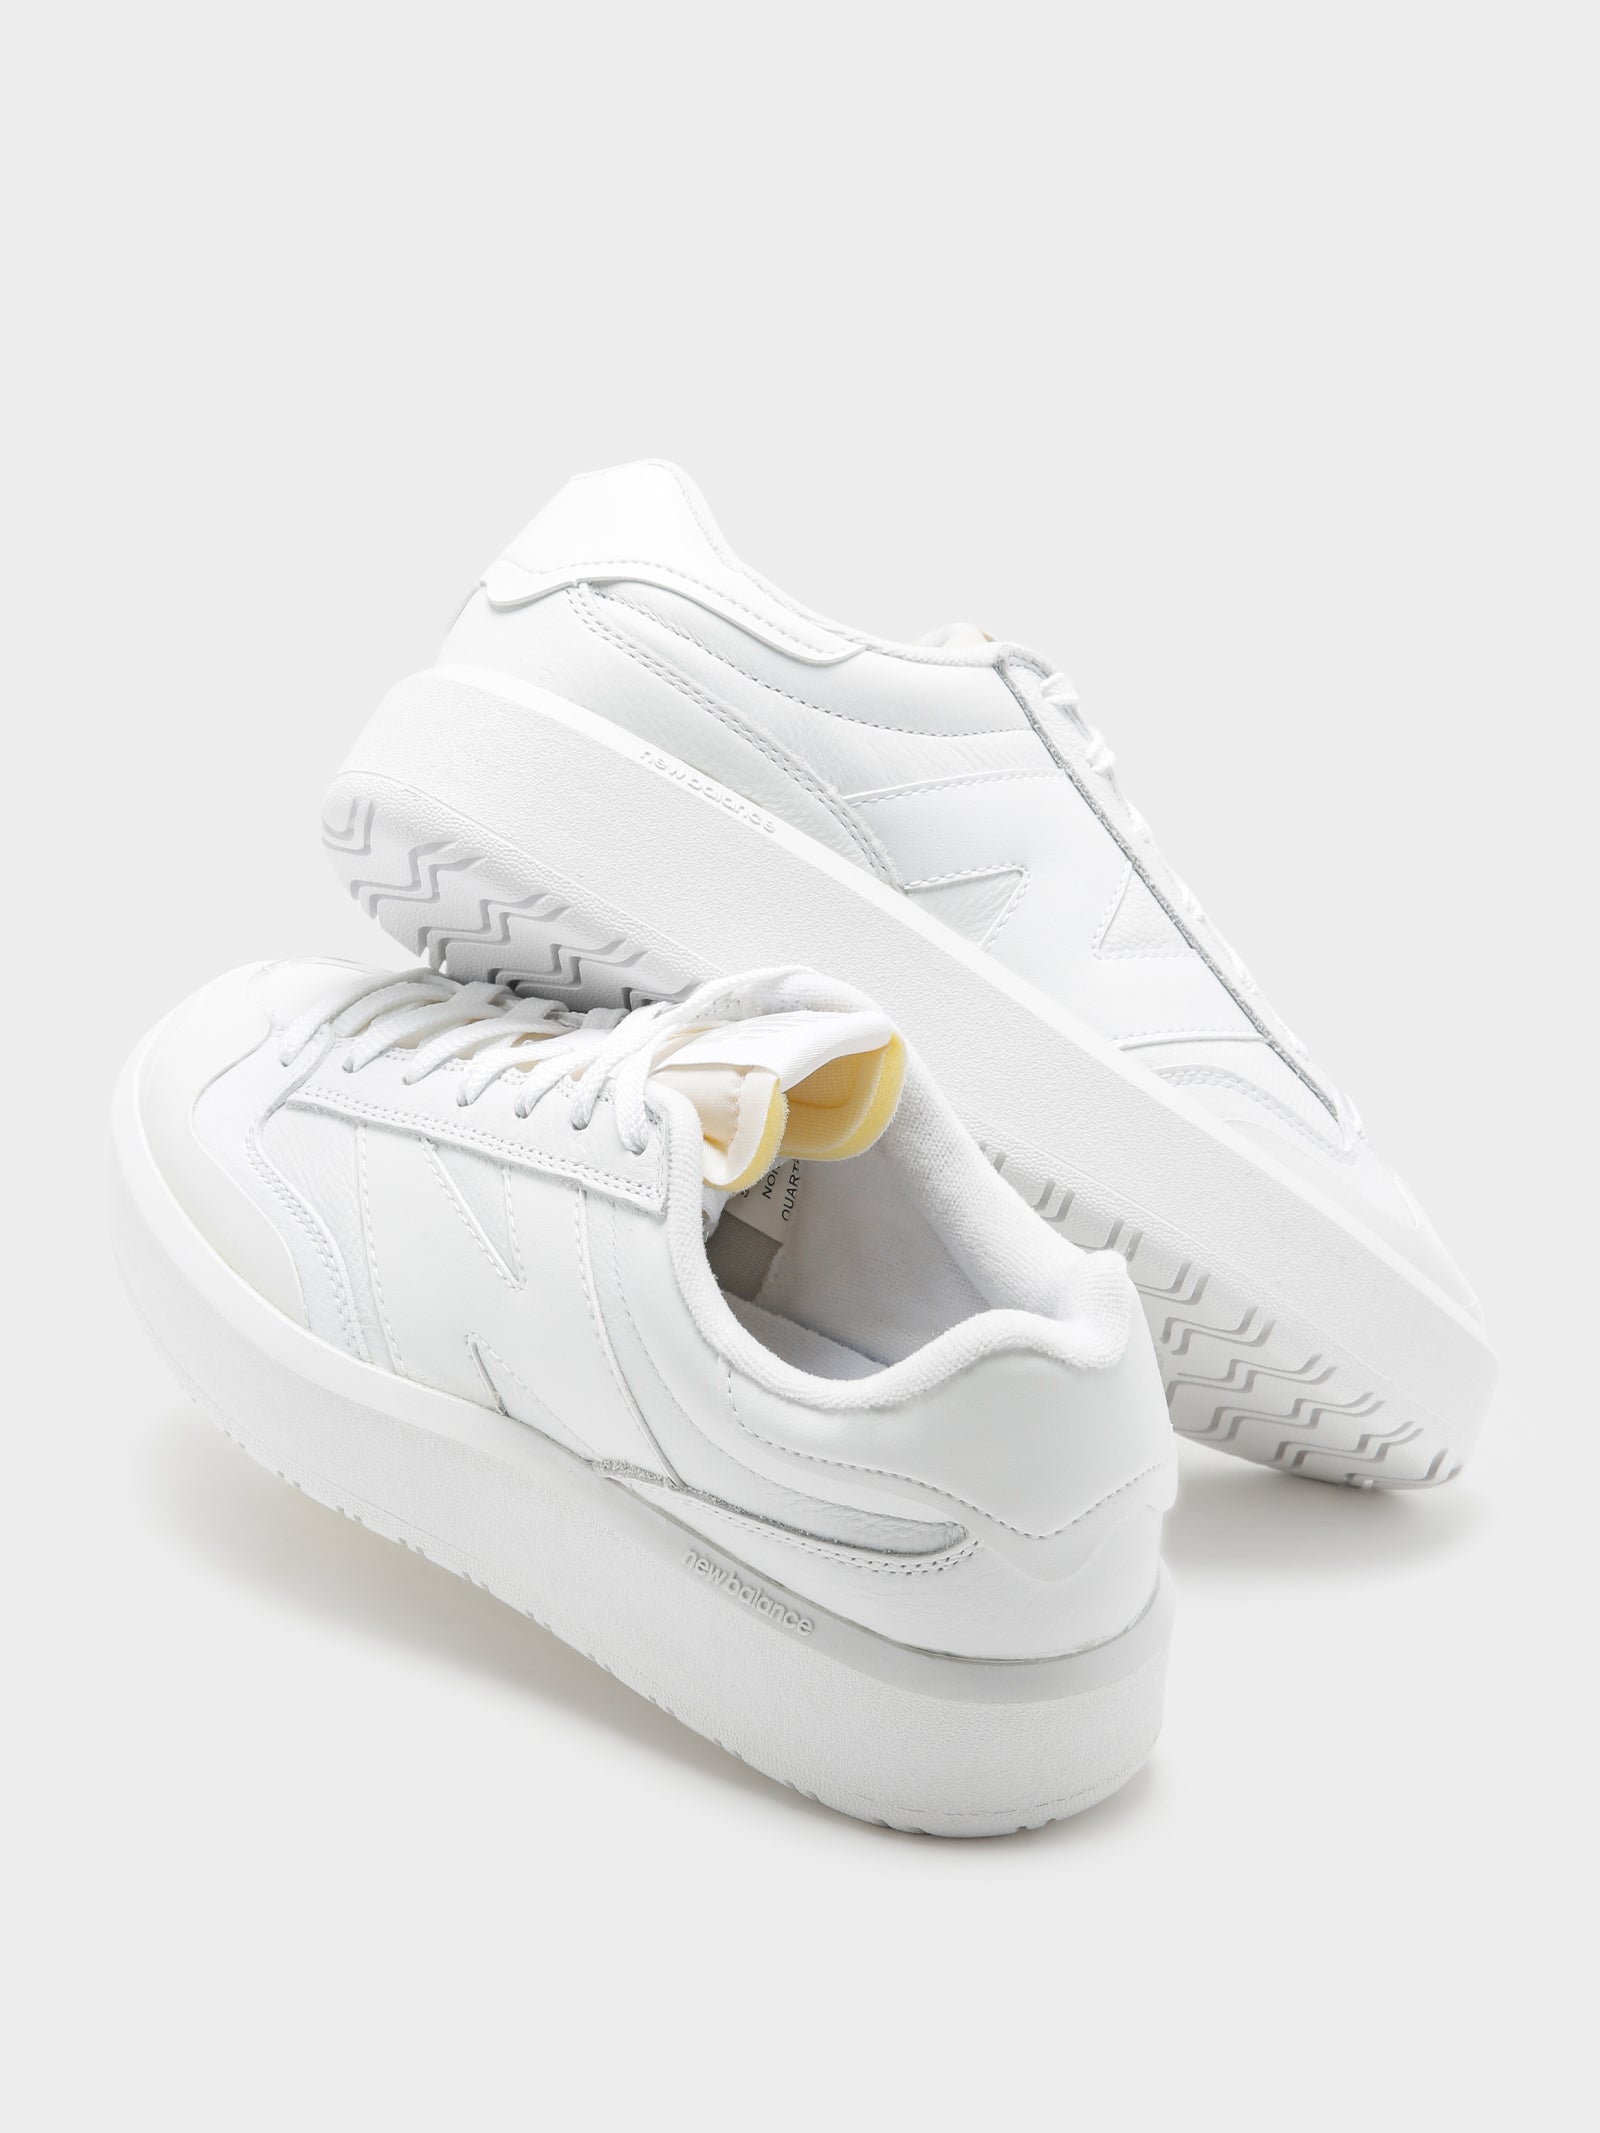 Unisex CT302 Sneakers in White